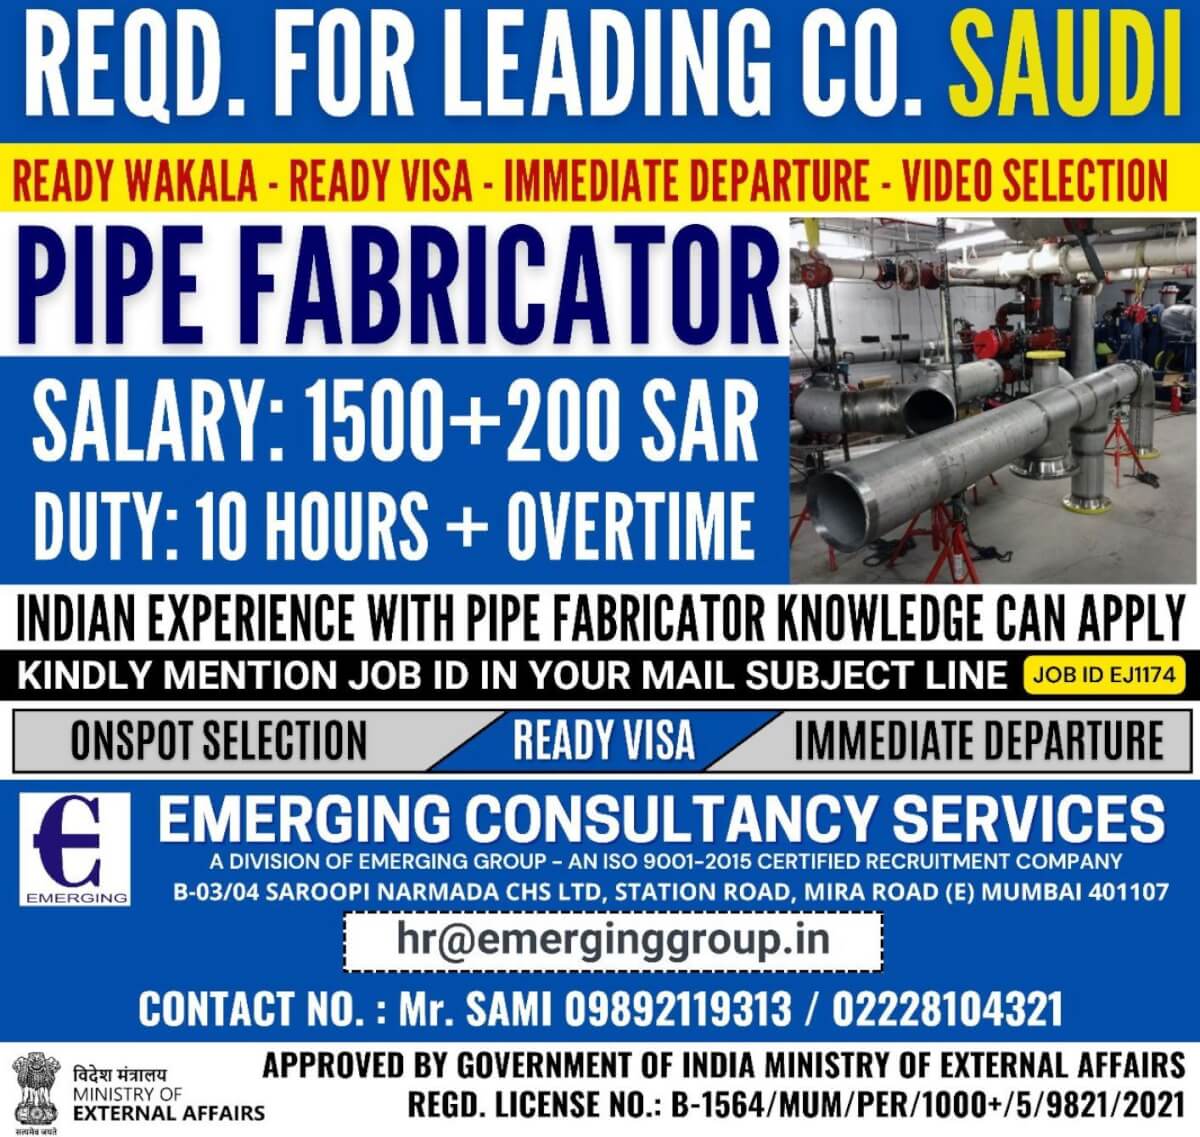 URGENTLY REQUIRED FOR LEADING COMPANY IN SAUDI ARABIA - READY WAKAL READY VISA